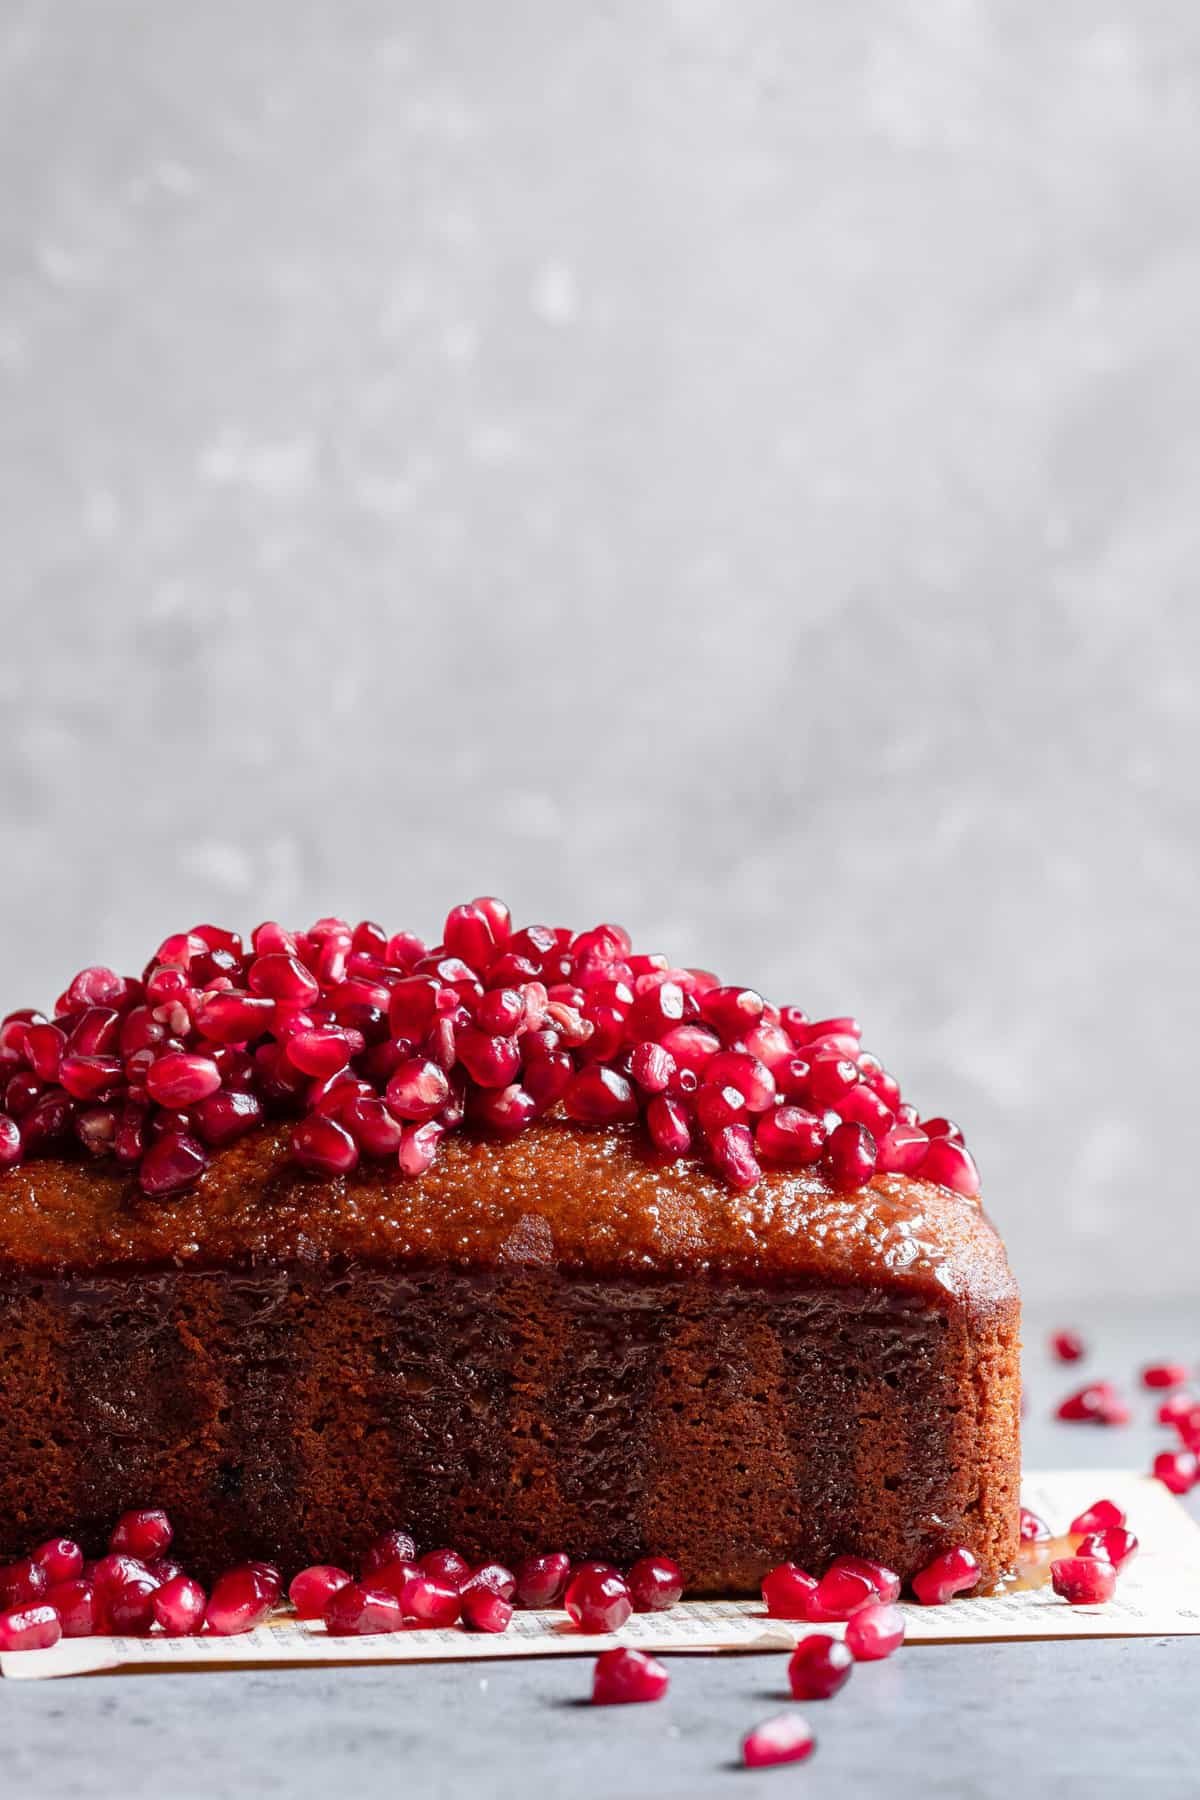 Honey dessert topped with pomegranate seeds.